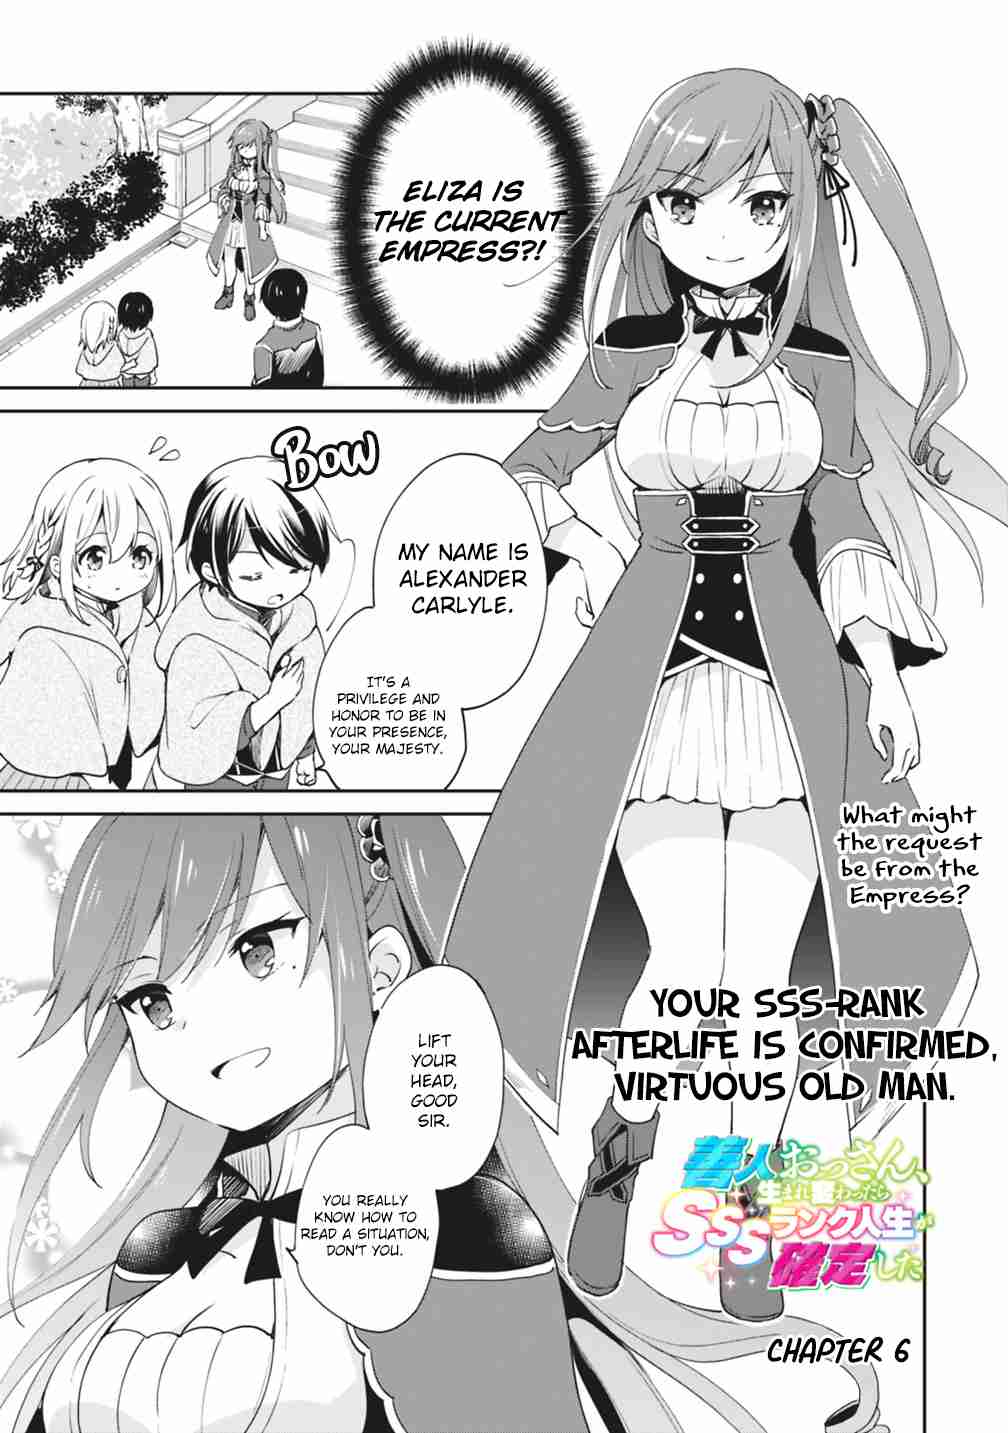 Your SSS rank Afterlife is Confirmed, Virtuous Old Man Vol. 1 Ch. 6